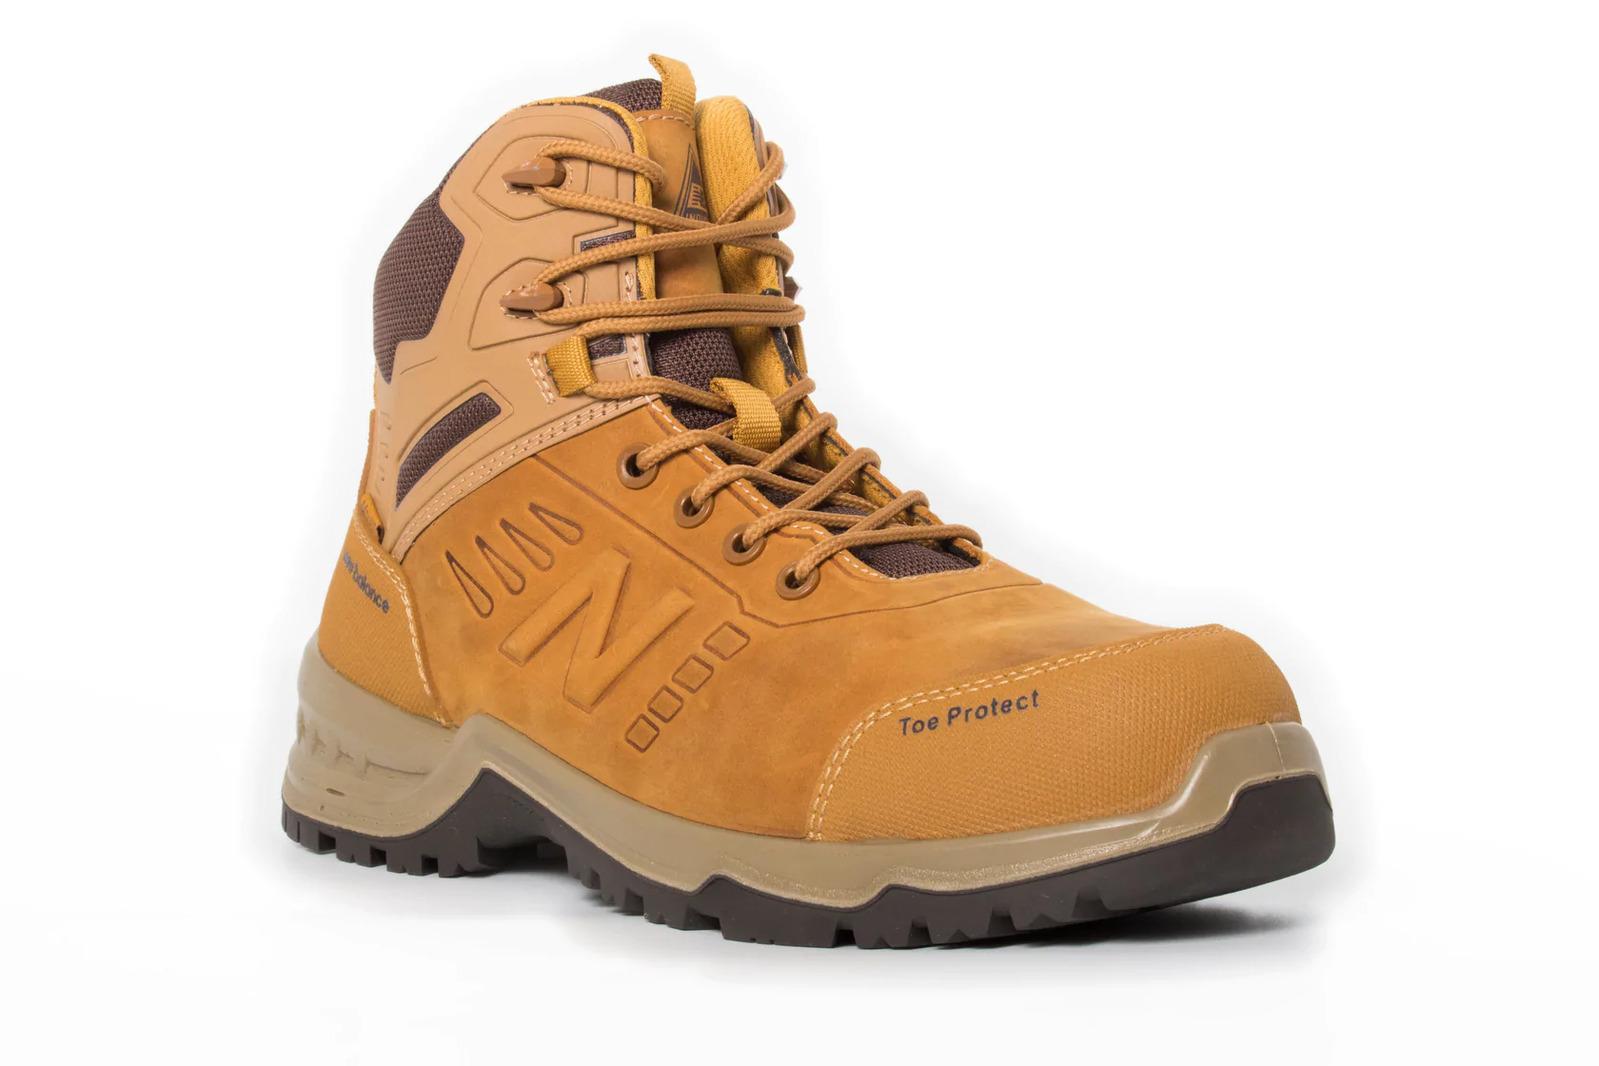 New Balance Mens Contour Steel Toe Cap Safety Work Boots with Zip - Wheat - US 8 Width:2E